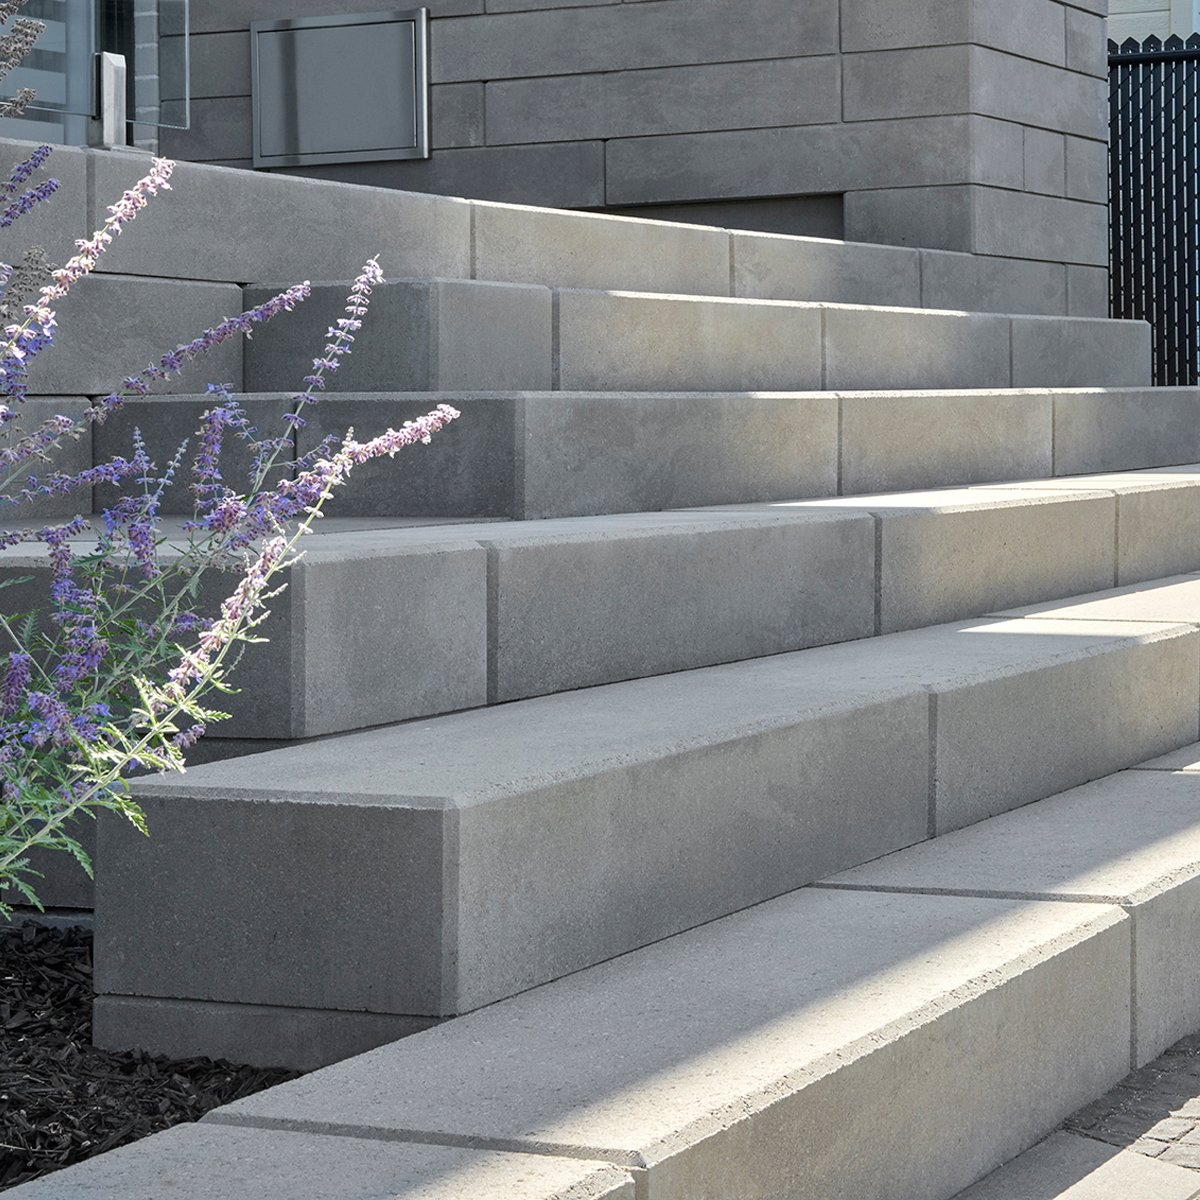 4 Stunning Stone Step Ideas To Take Your Front Yard To The Next Level